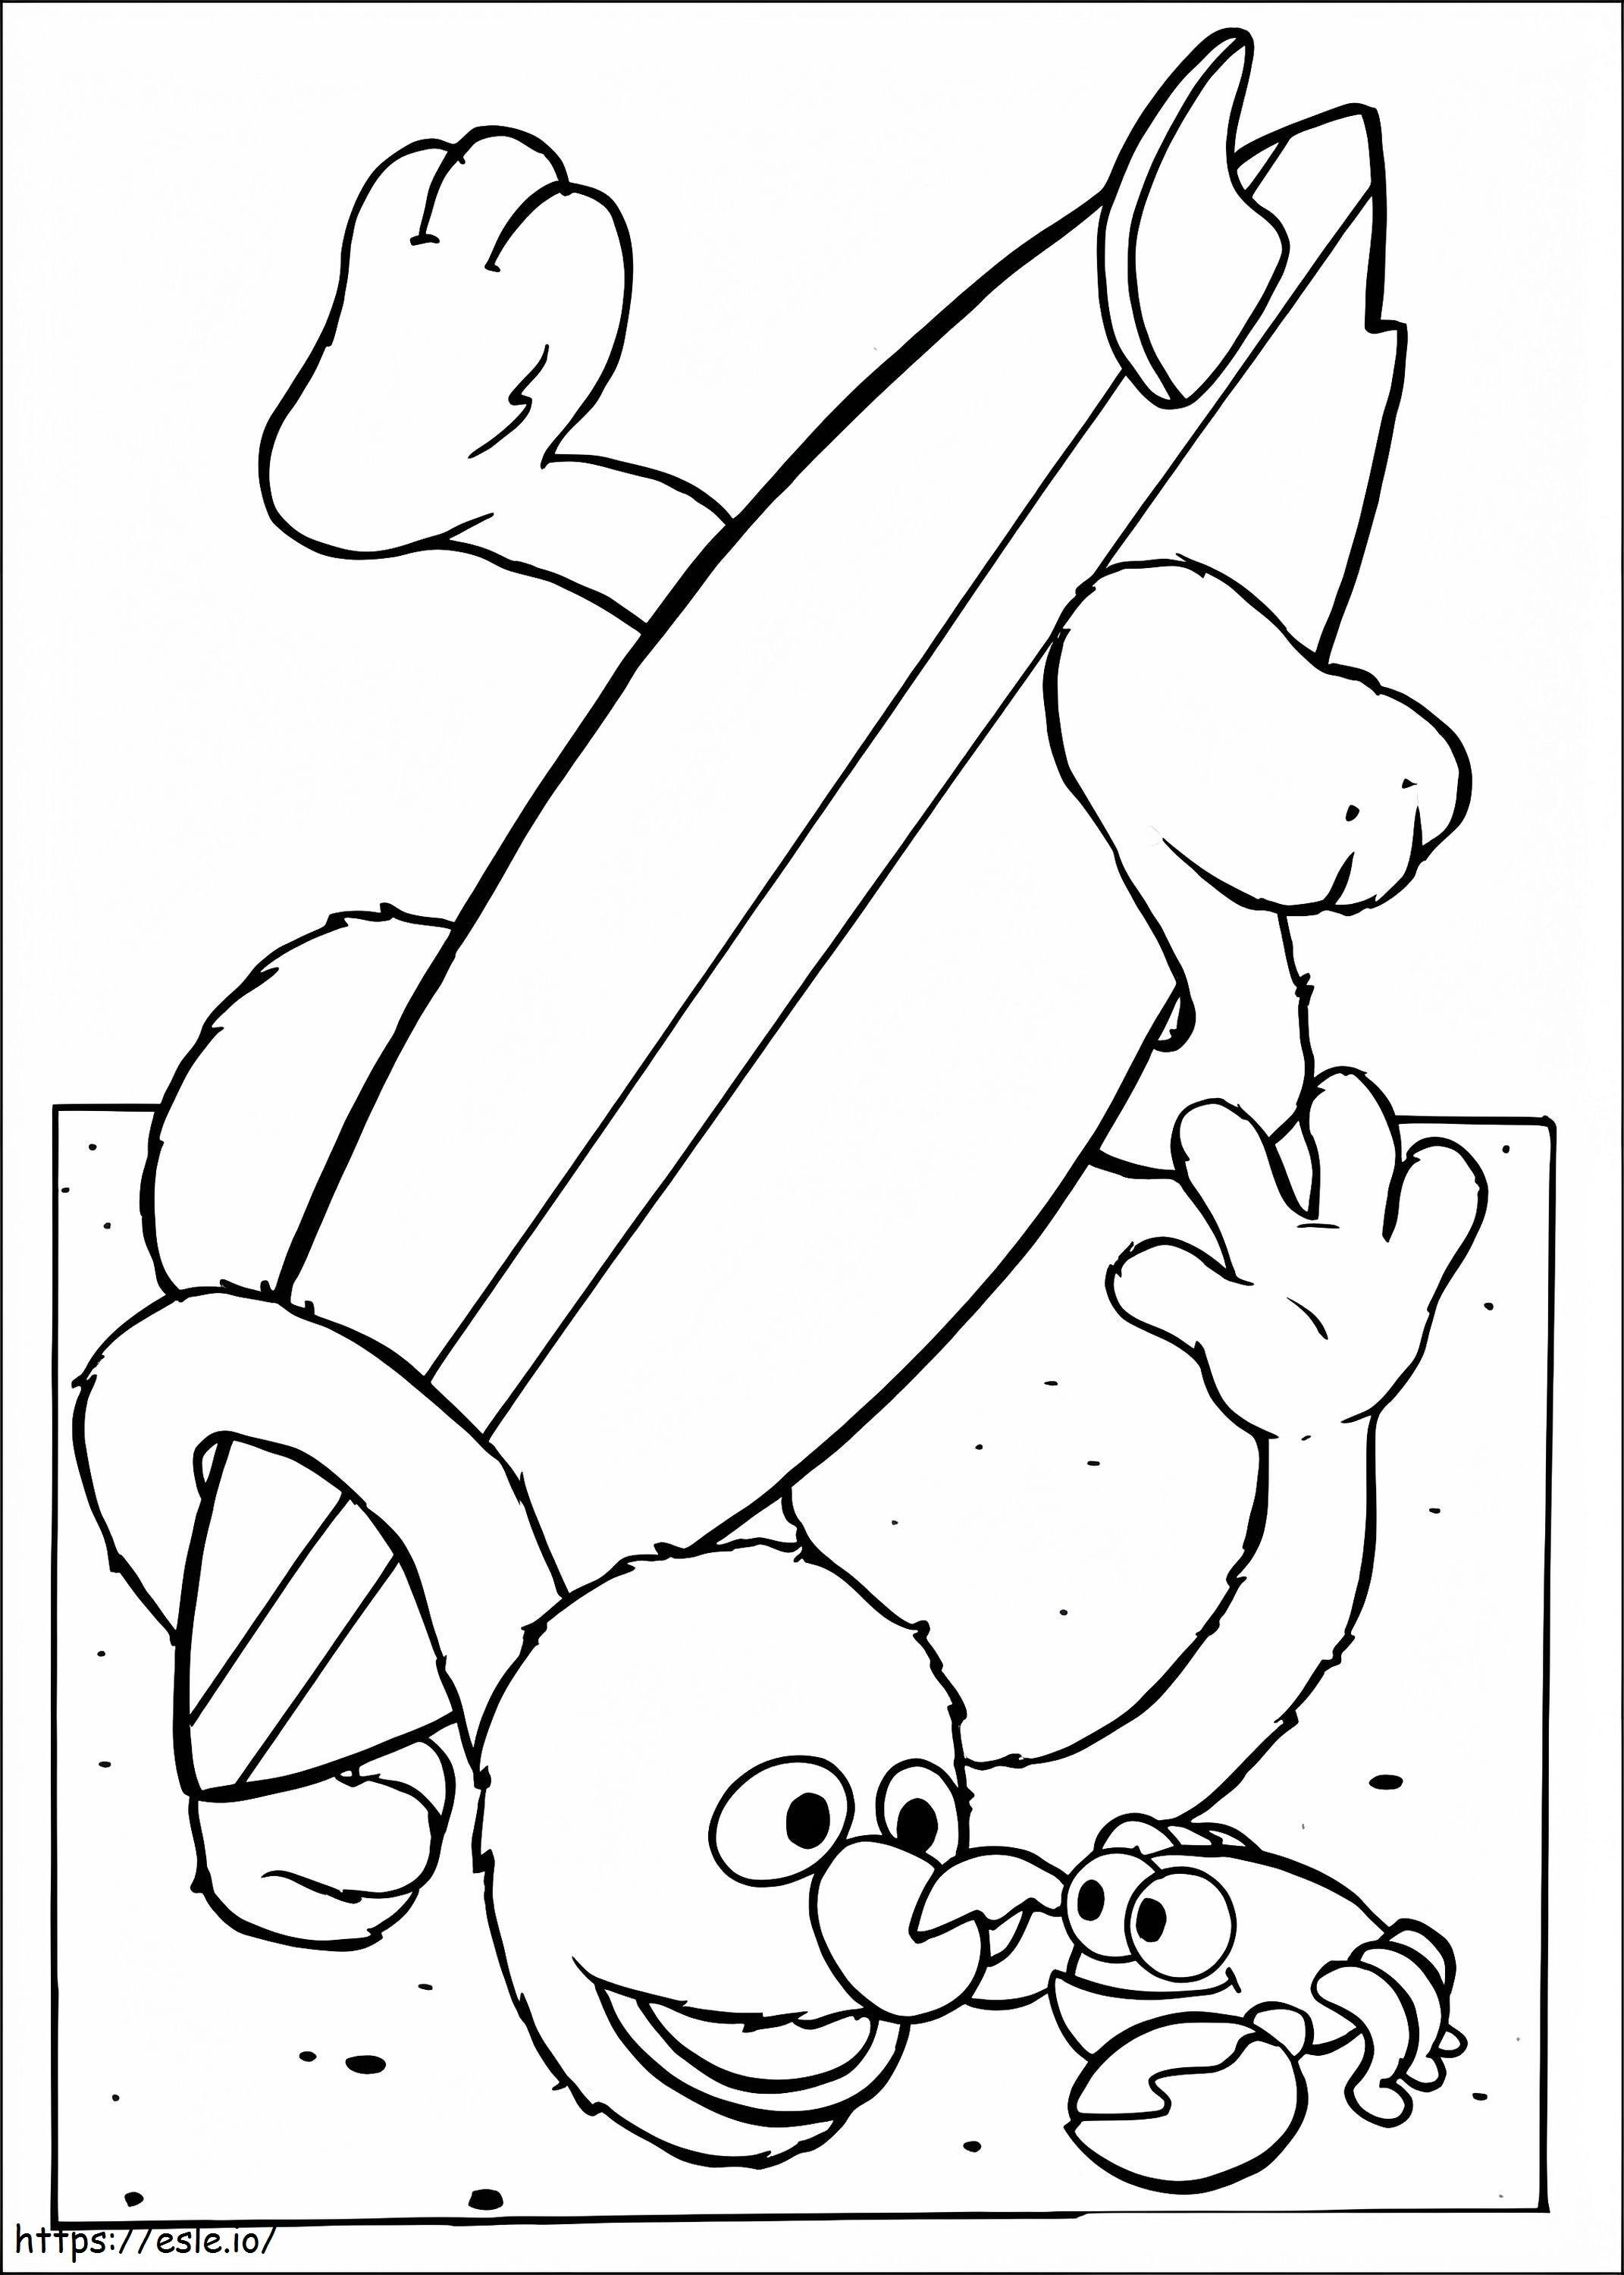 Grover And A Crab coloring page